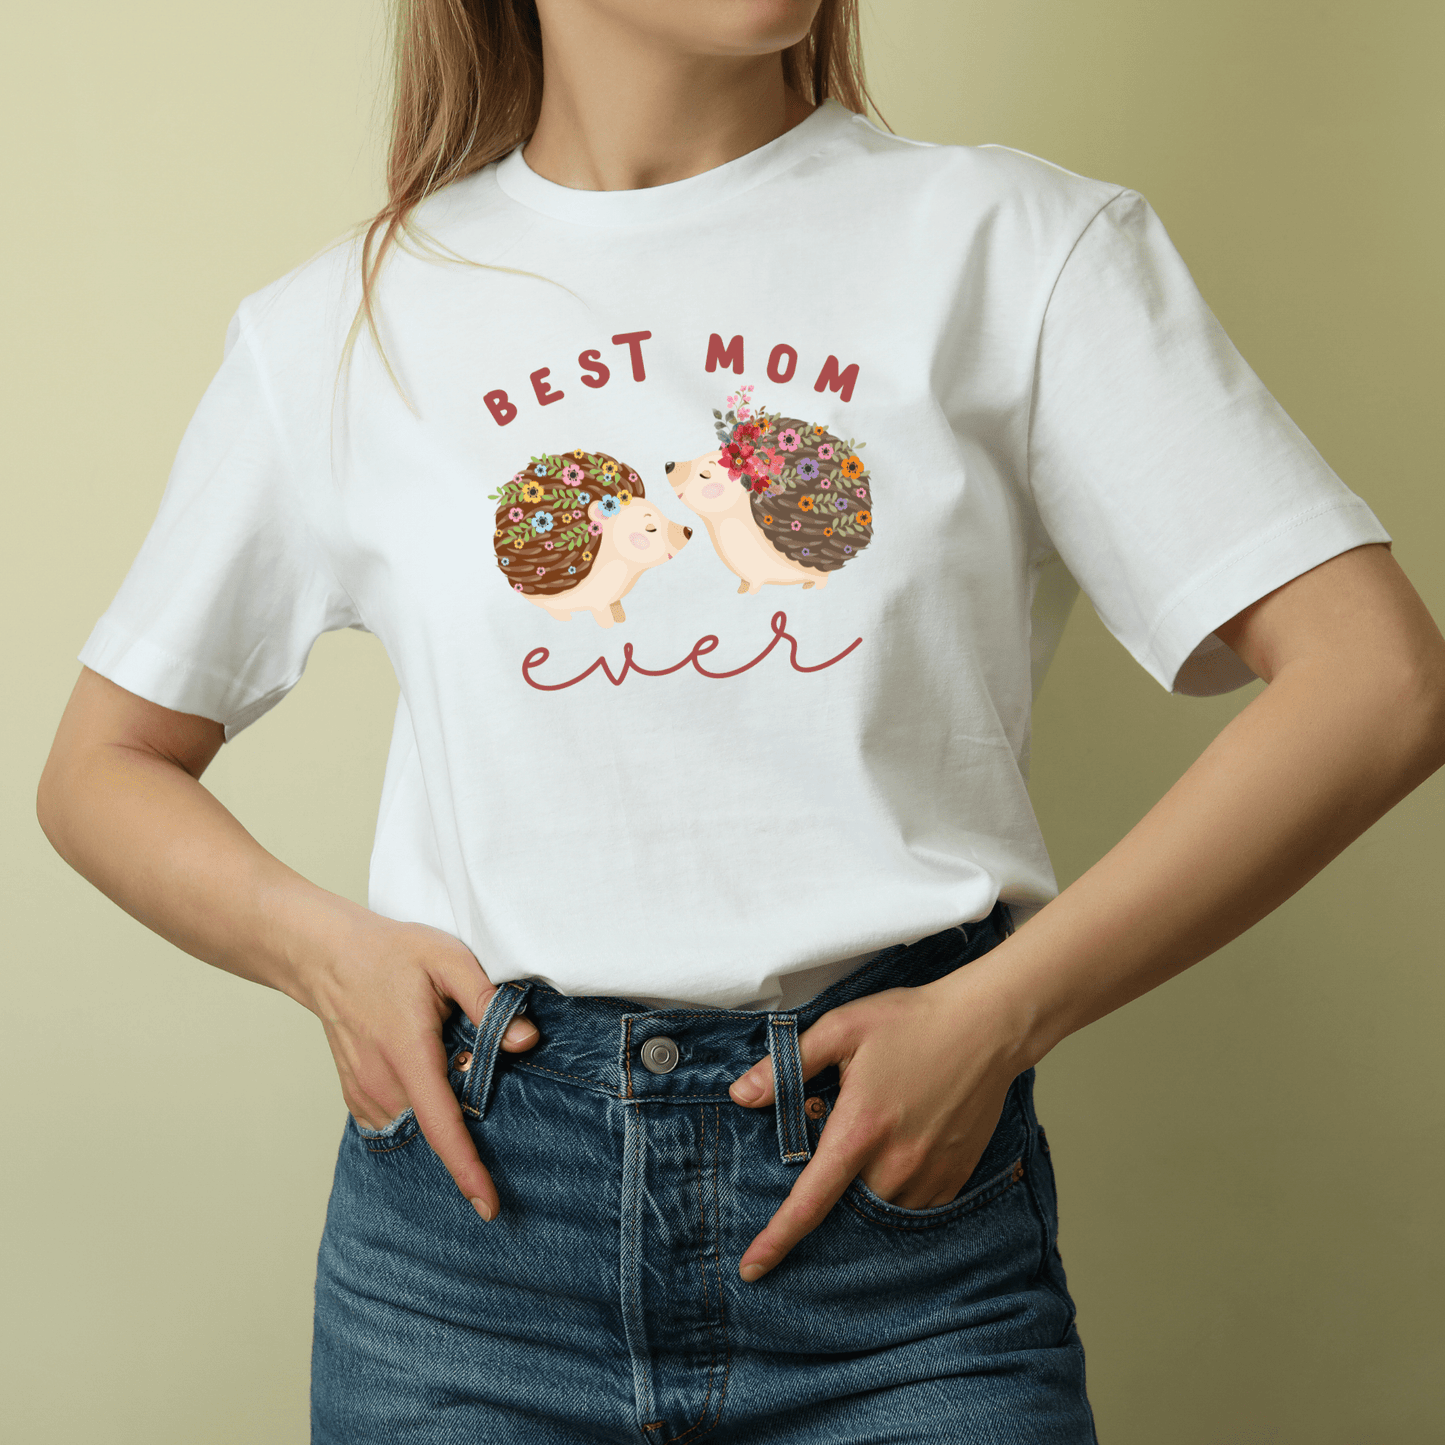 My first mothers day mom spring shirt